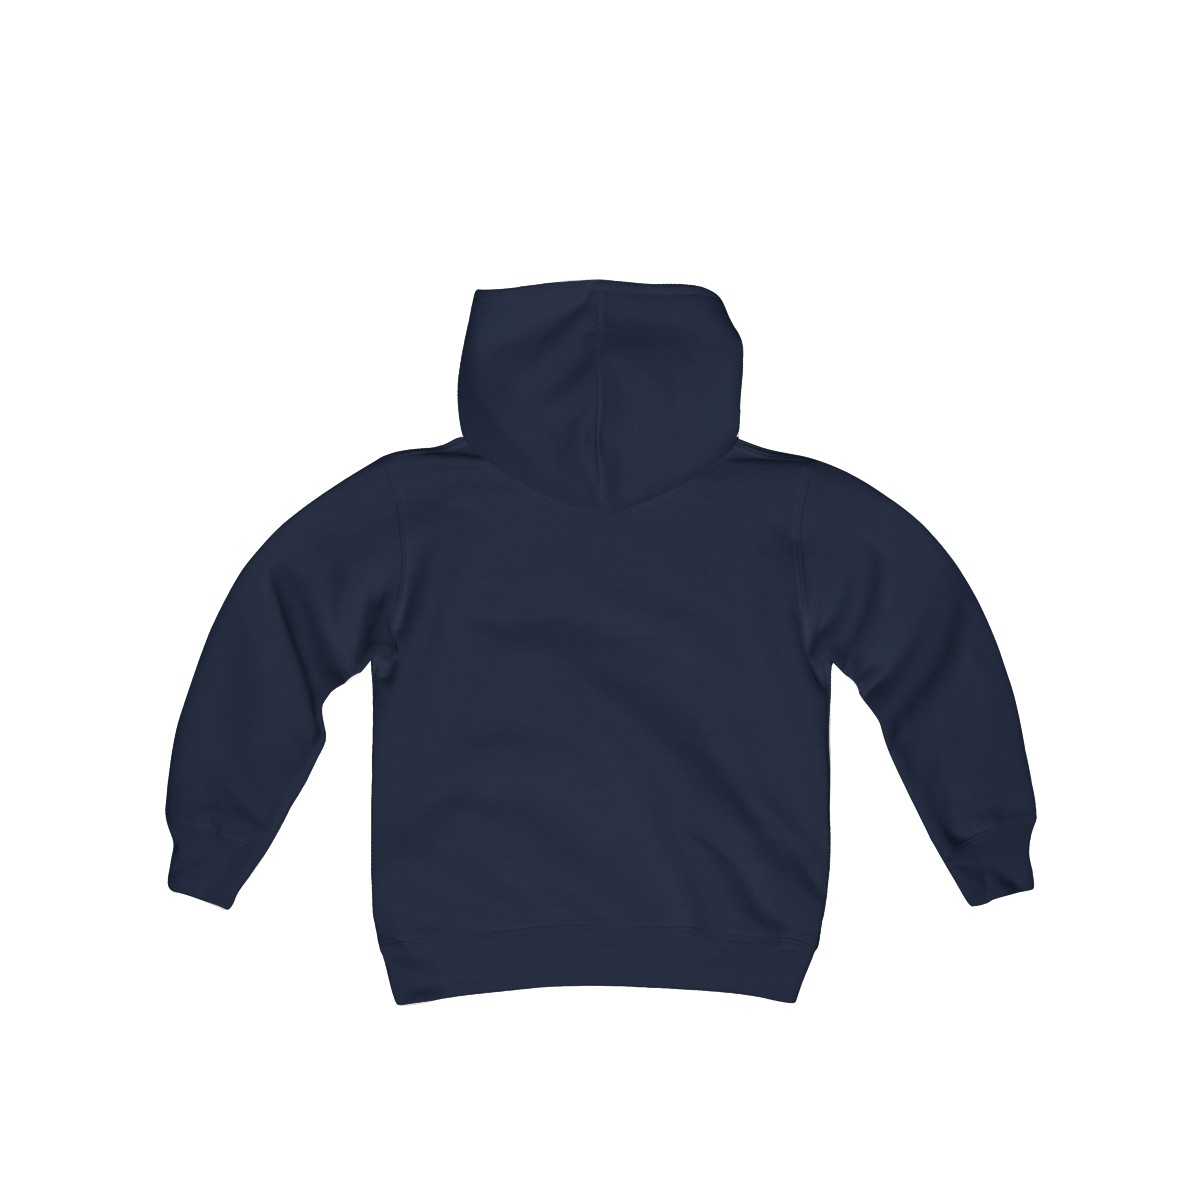 WK Youth Hoodie product thumbnail image